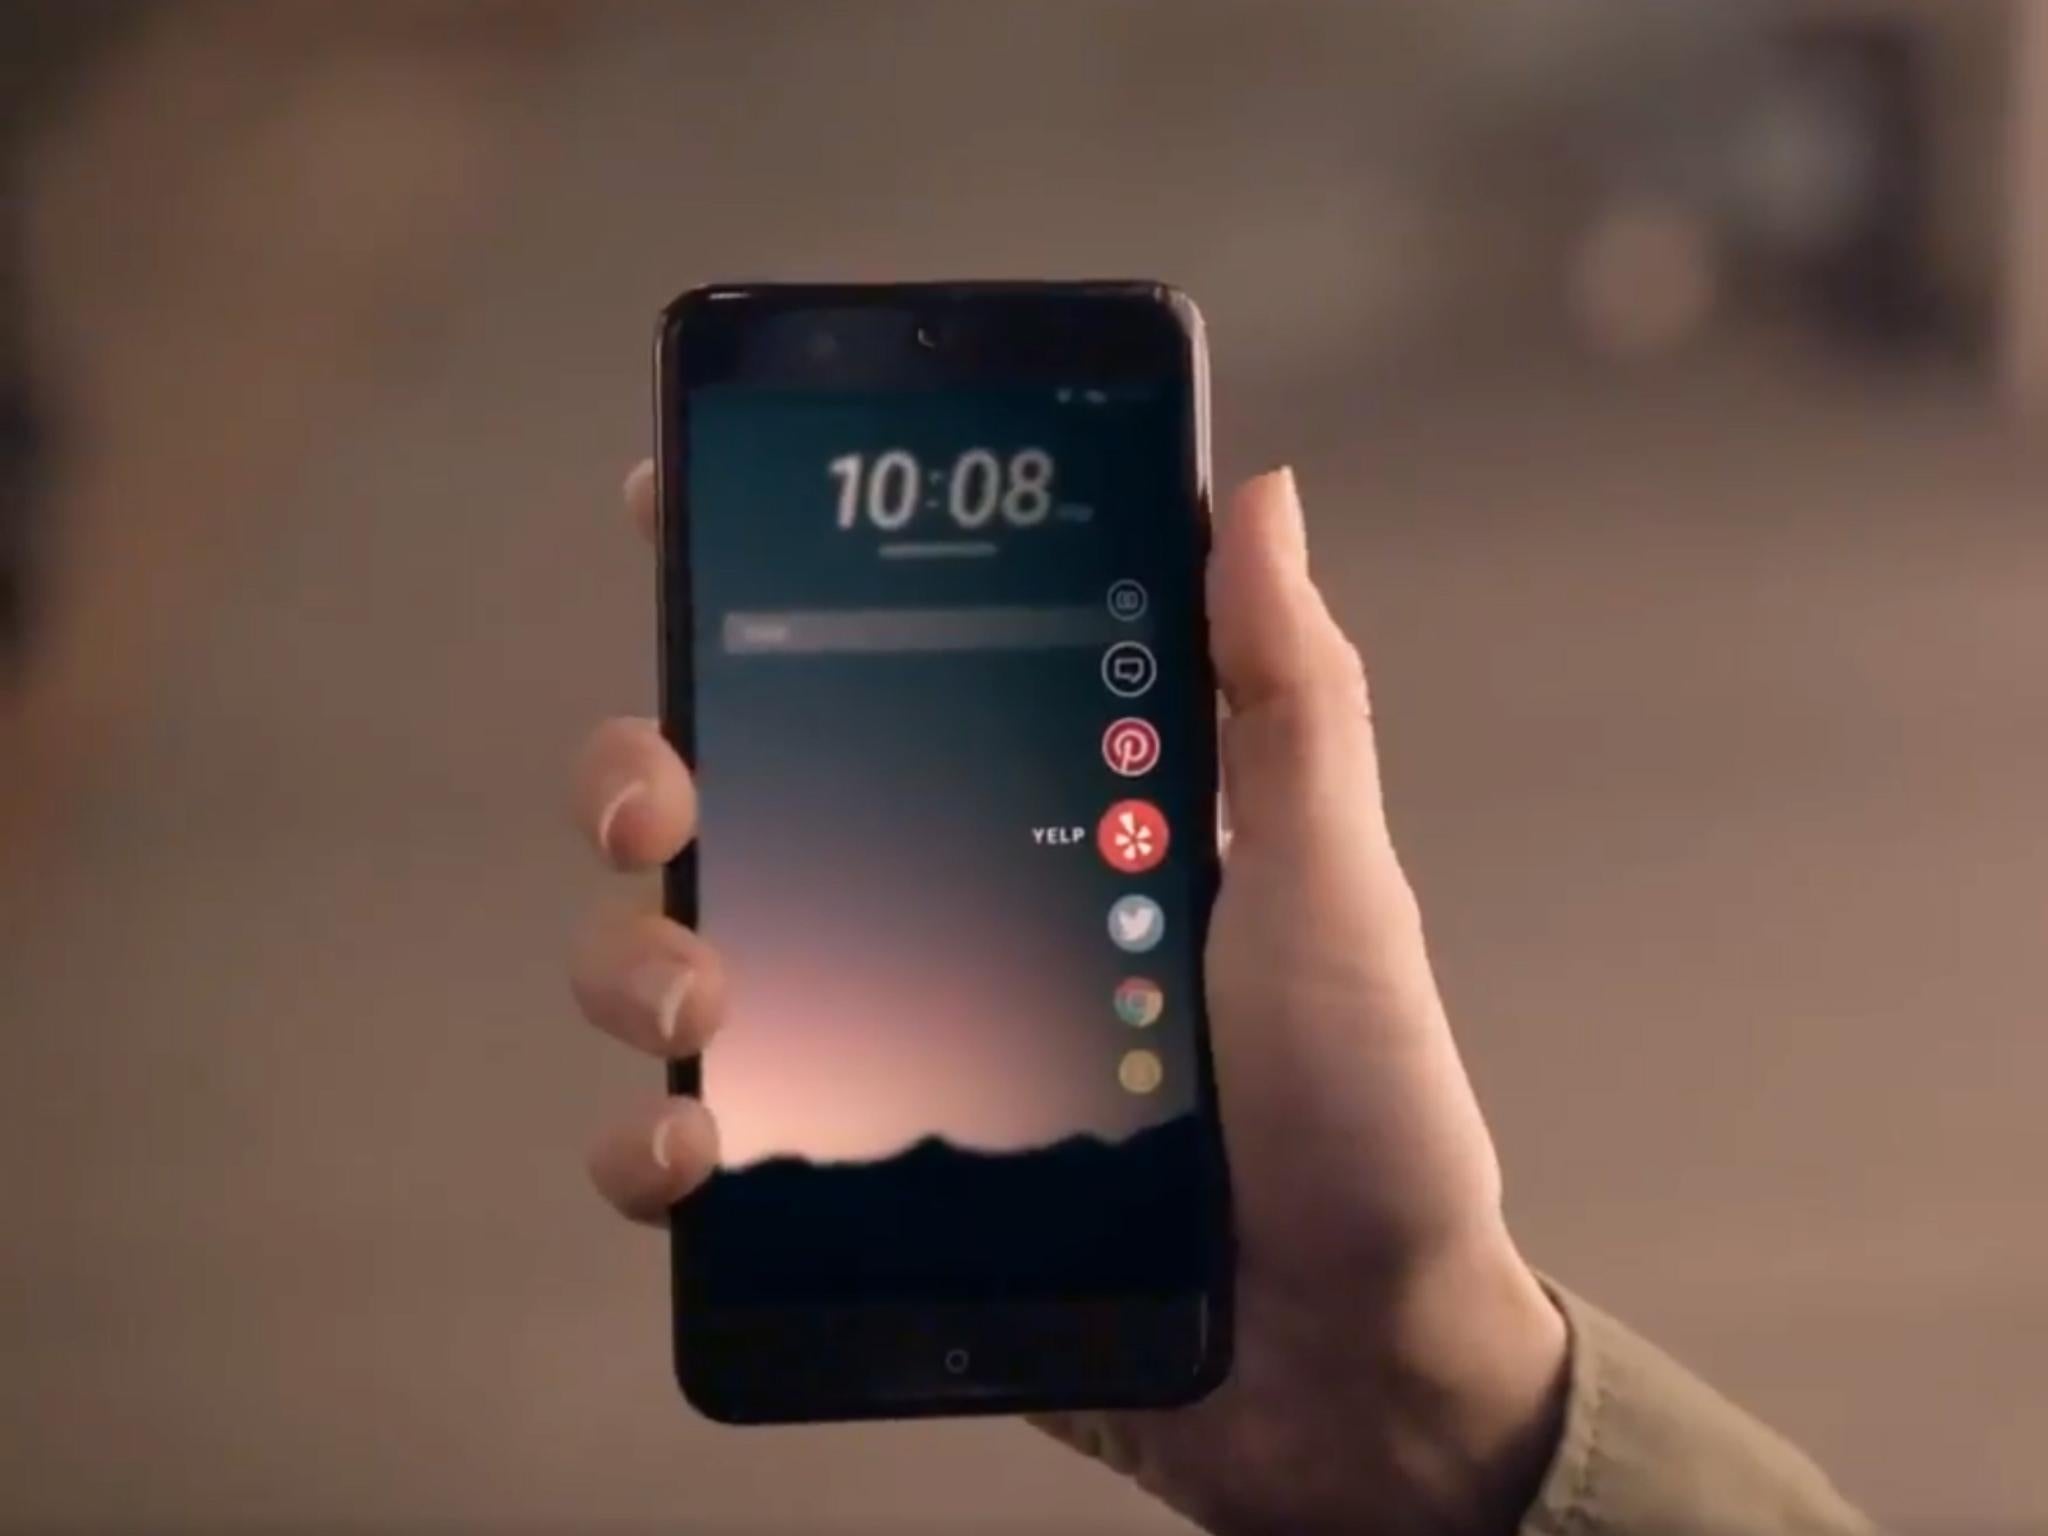 The unusual handset will be unveiled later this month